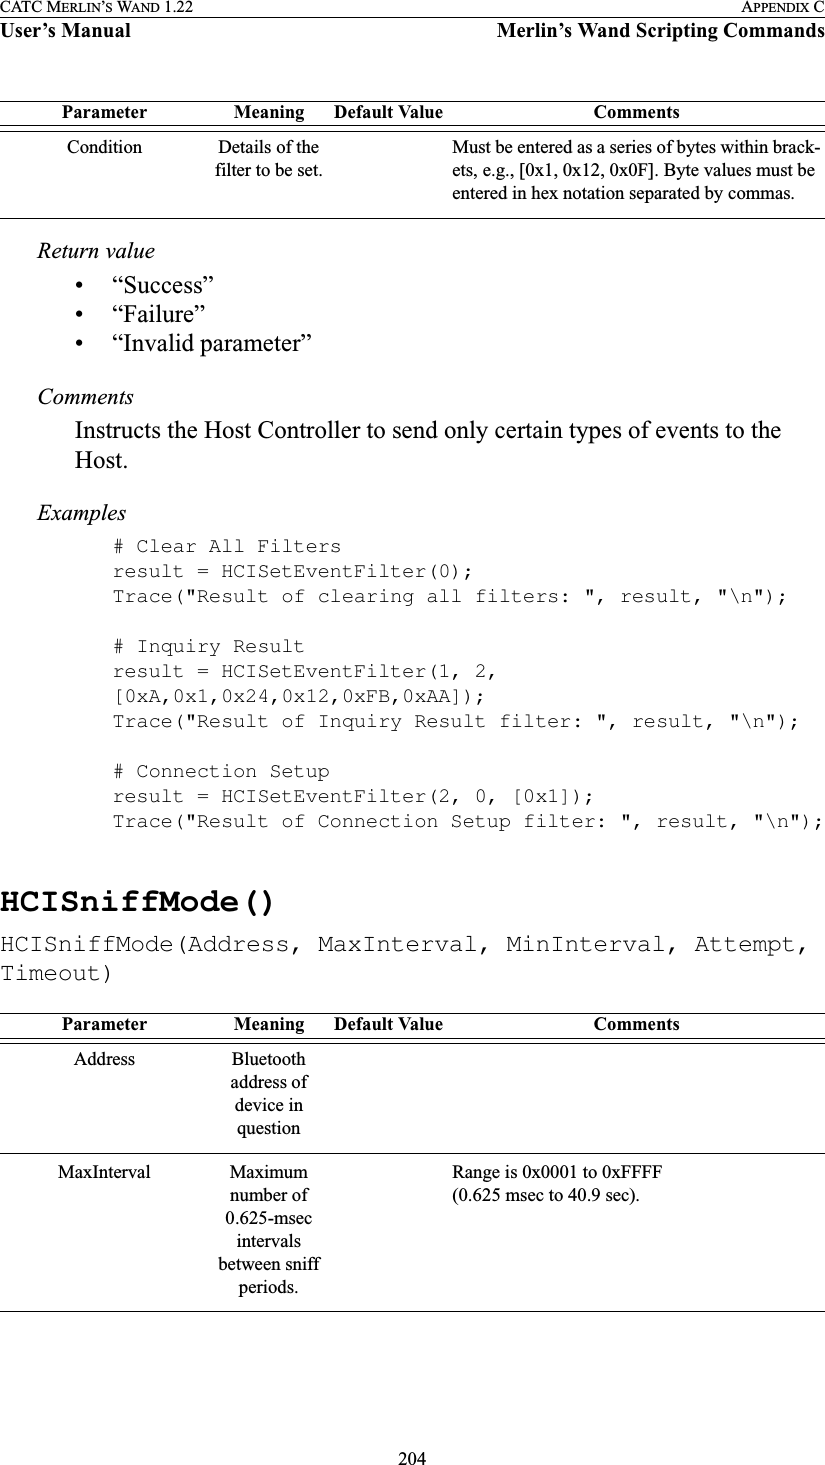 204CATC MERLIN’S WAND 1.22 APPENDIX CUser’s Manual Merlin’s Wand Scripting CommandsReturn value• “Success”• “Failure”• “Invalid parameter”CommentsInstructs the Host Controller to send only certain types of events to the Host.Examples# Clear All Filtersresult = HCISetEventFilter(0);Trace(&quot;Result of clearing all filters: &quot;, result, &quot;\n&quot;);# Inquiry Resultresult = HCISetEventFilter(1, 2, [0xA,0x1,0x24,0x12,0xFB,0xAA]);Trace(&quot;Result of Inquiry Result filter: &quot;, result, &quot;\n&quot;);# Connection Setupresult = HCISetEventFilter(2, 0, [0x1]);Trace(&quot;Result of Connection Setup filter: &quot;, result, &quot;\n&quot;);HCISniffMode()HCISniffMode(Address, MaxInterval, MinInterval, Attempt, Timeout)Condition Details of the filter to be set.Must be entered as a series of bytes within brack-ets, e.g., [0x1, 0x12, 0x0F]. Byte values must be entered in hex notation separated by commas.Parameter Meaning Default Value CommentsAddress Bluetooth address of device in questionMaxInterval Maximum number of 0.625-msec intervals between sniff periods.Range is 0x0001 to 0xFFFF (0.625 msec to 40.9 sec).Parameter Meaning Default Value Comments